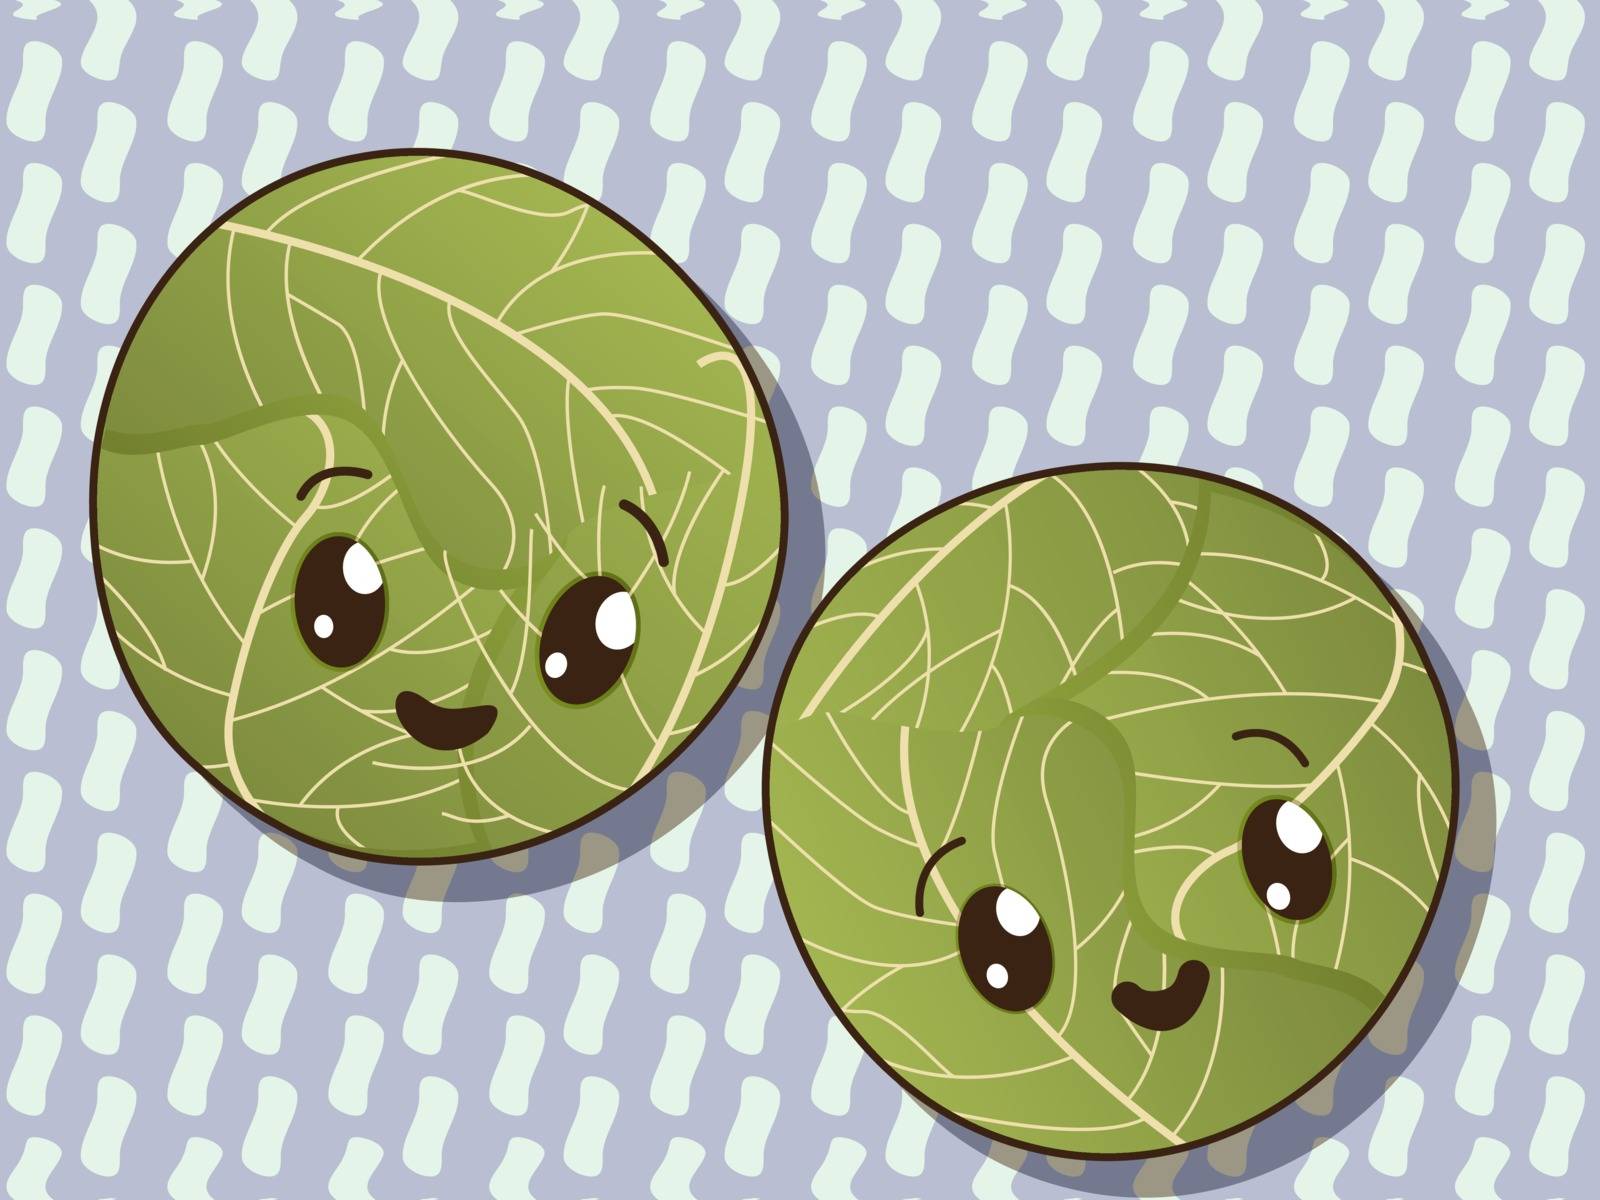 Kawaii style drawing cabbage icons